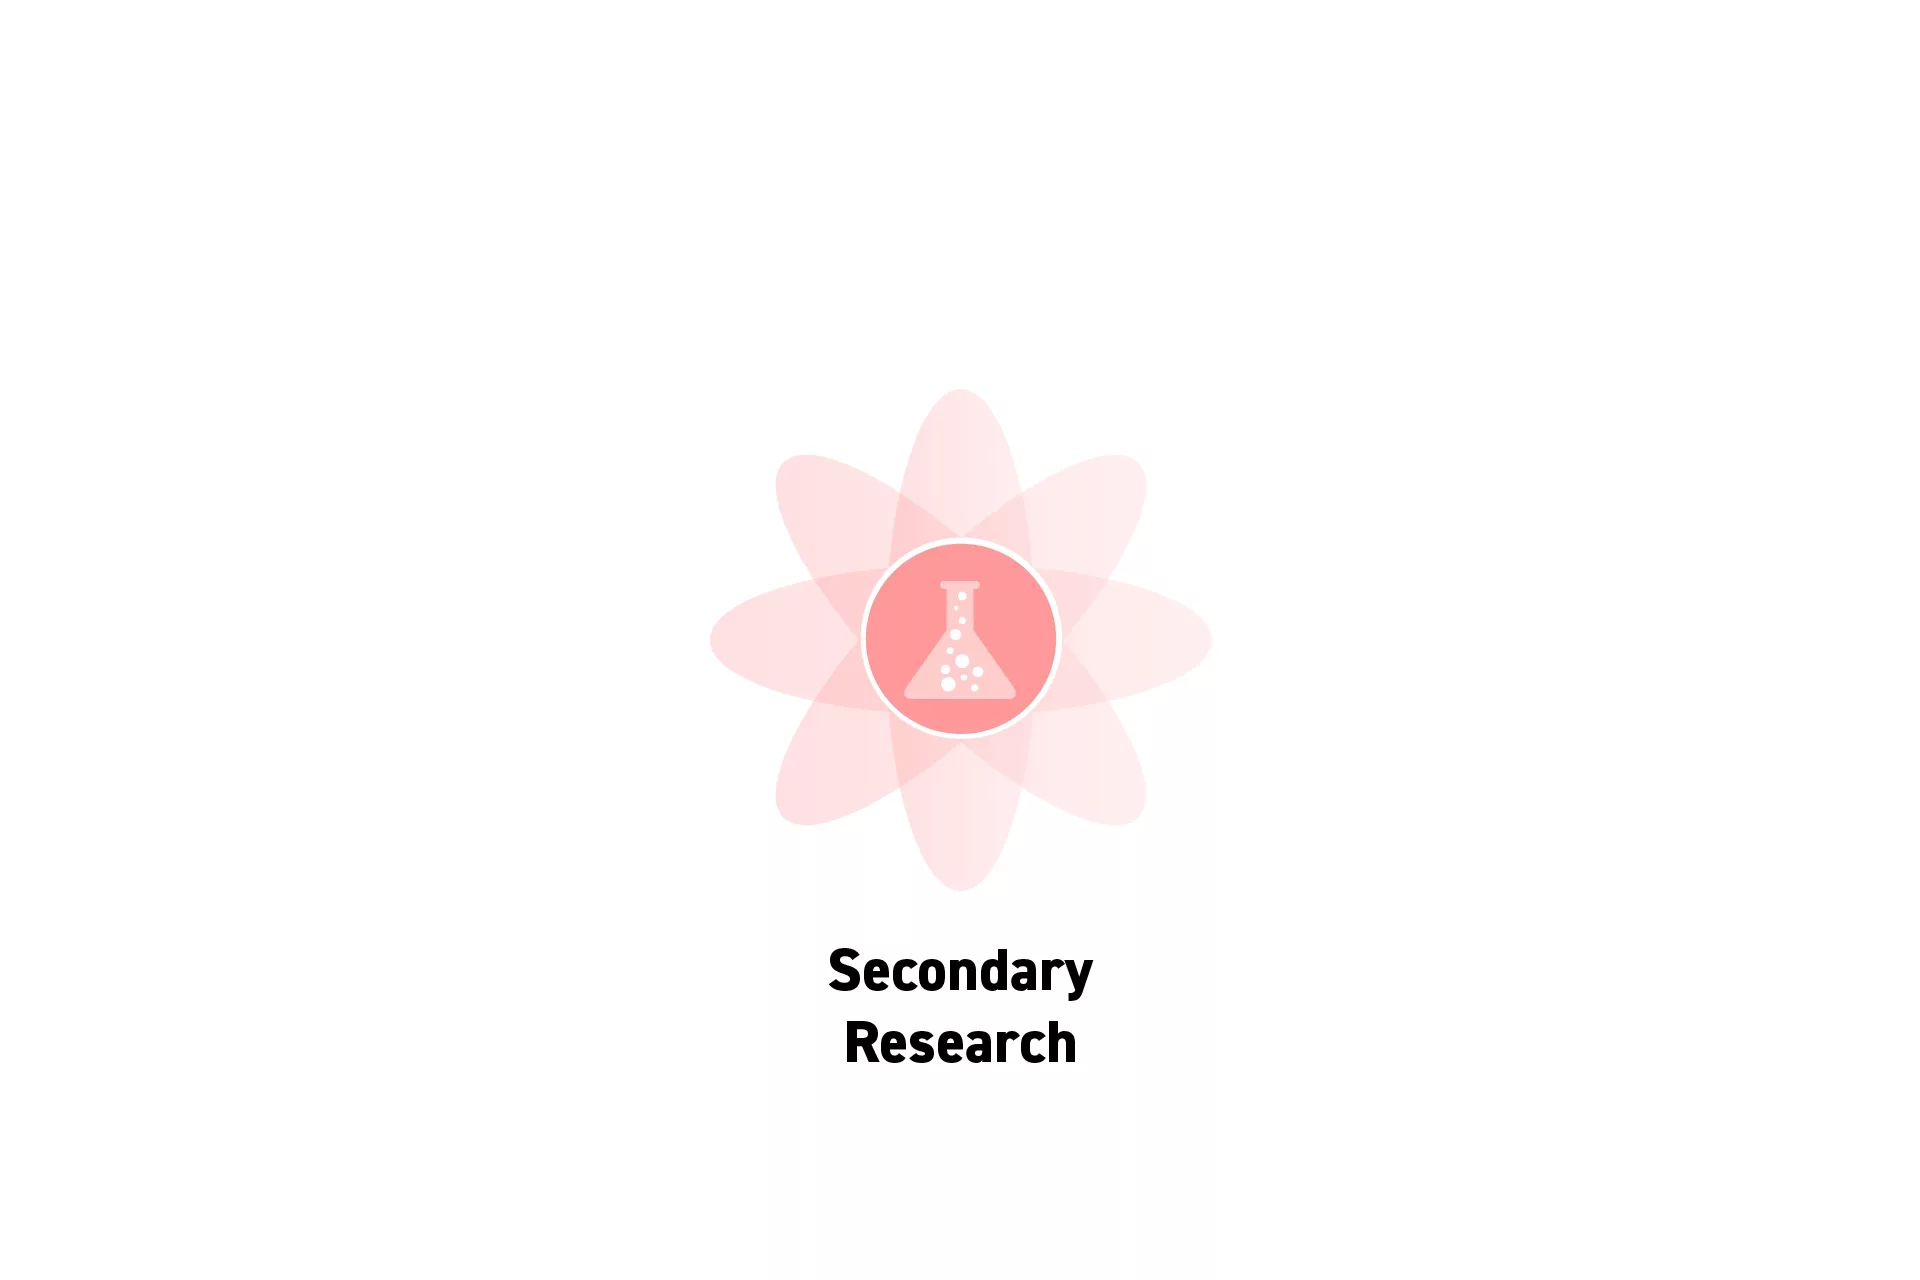 
<p>A flower that represents Strategy with the text “Secondary Research” beneath it.</p>
<p></p>